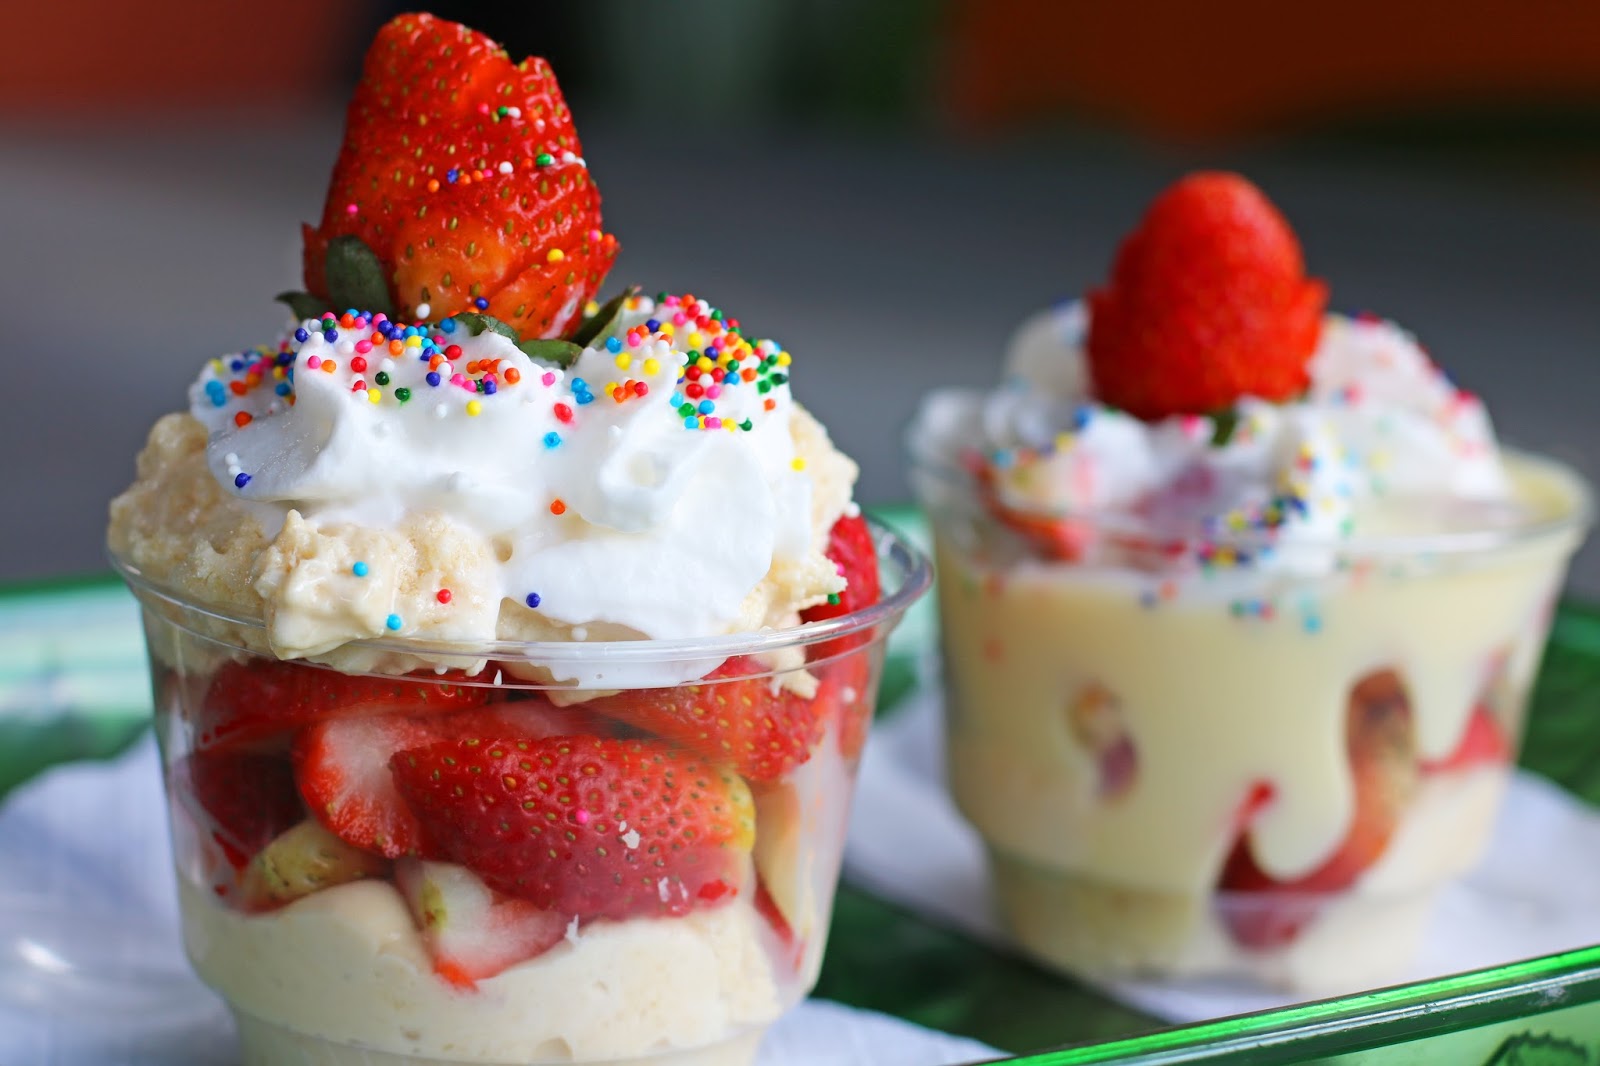 Strawberries and cream are a traditional dessert served in Chiriqui, Panama